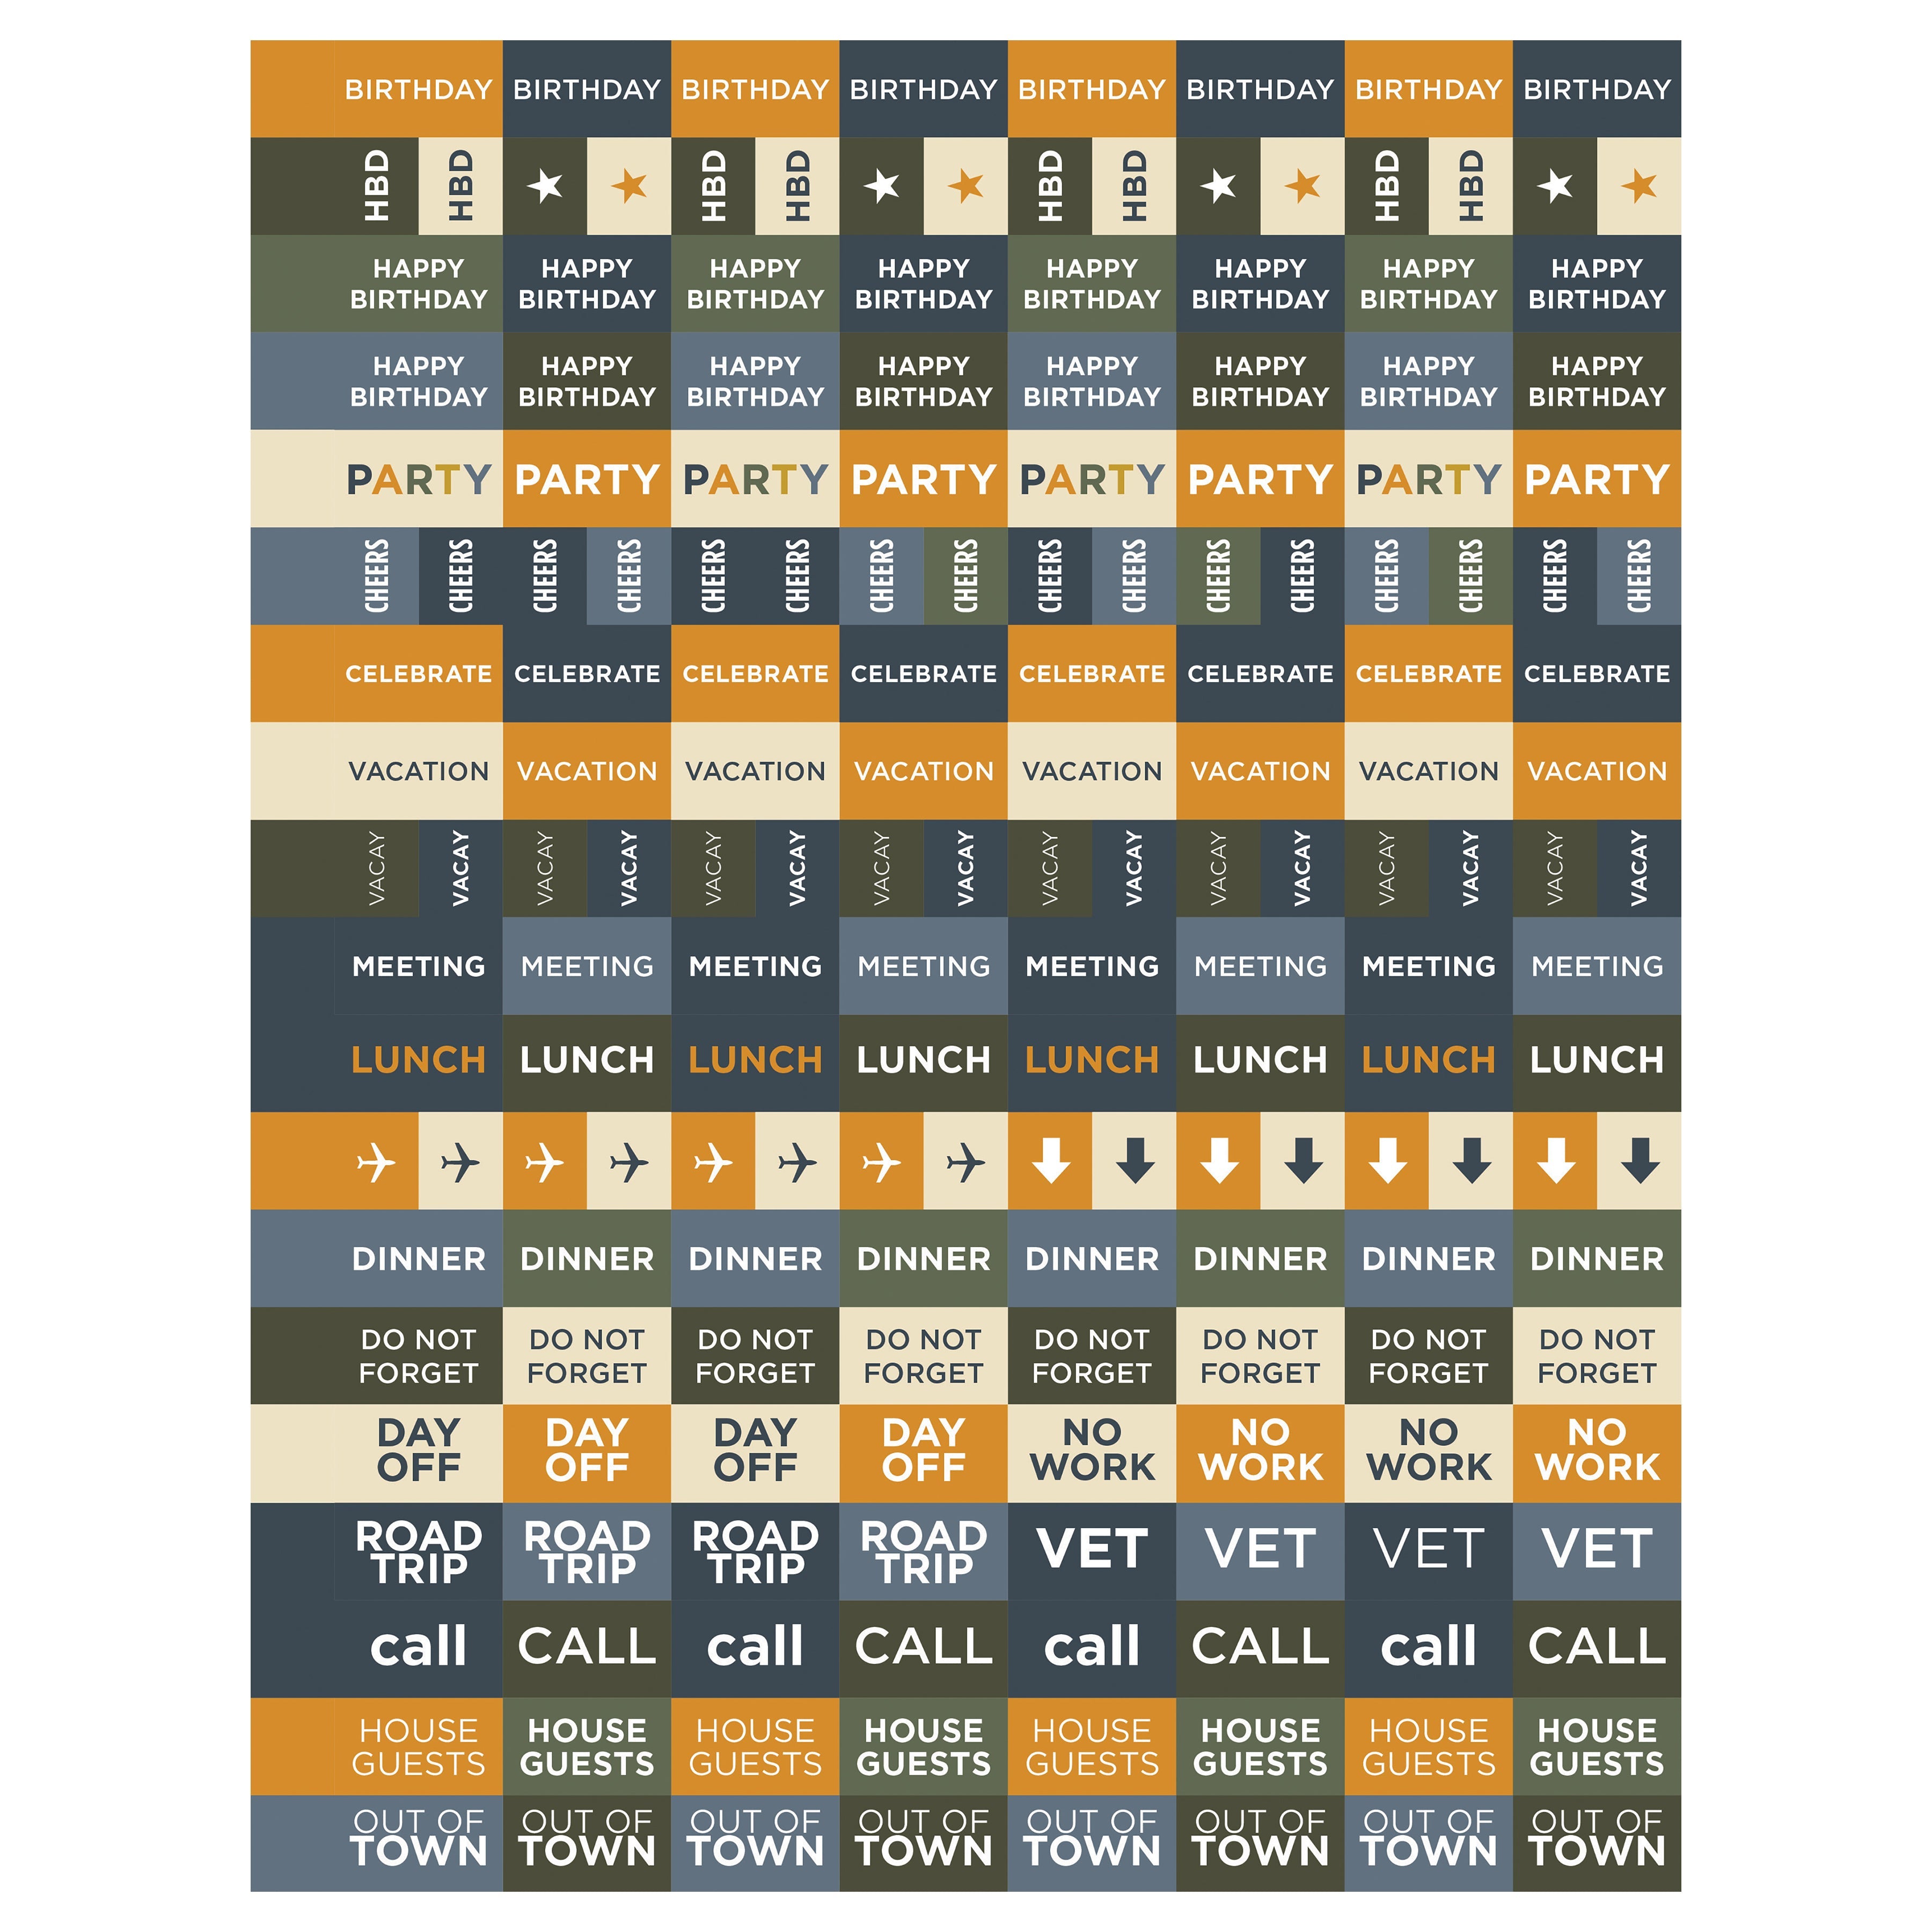 2025 Navy Grid Space - Large Monthly & Weekly Diary/Planner